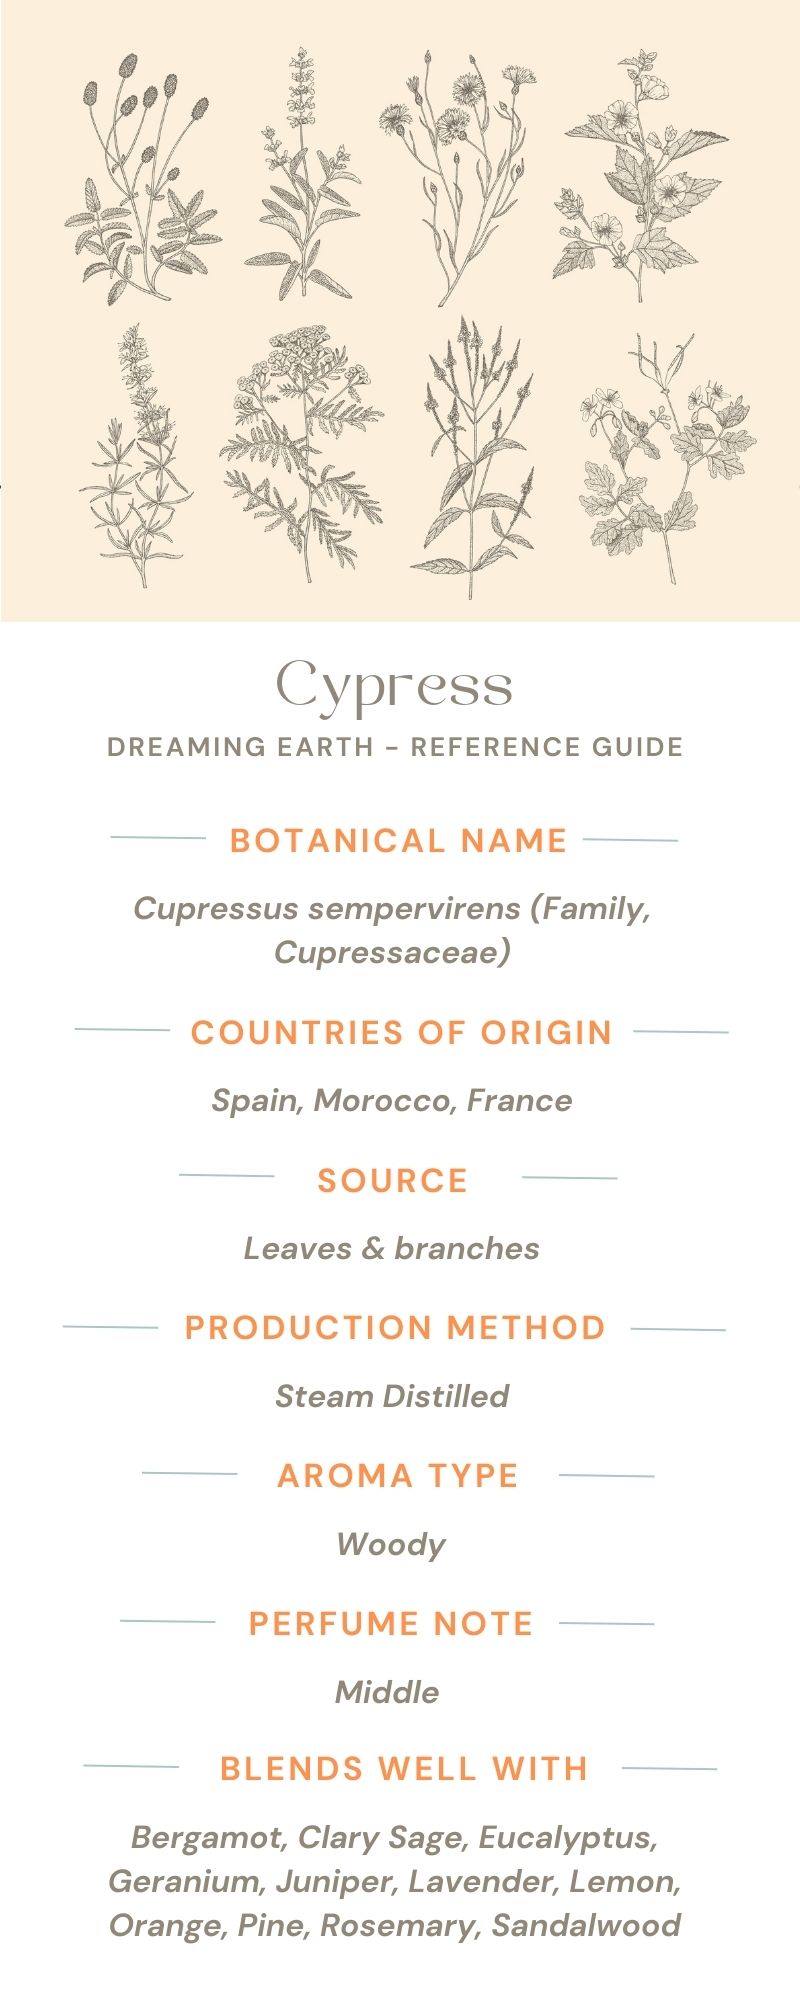 Load image into Gallery viewer, Cypress Essential Oil - Dreaming Earth Inc
